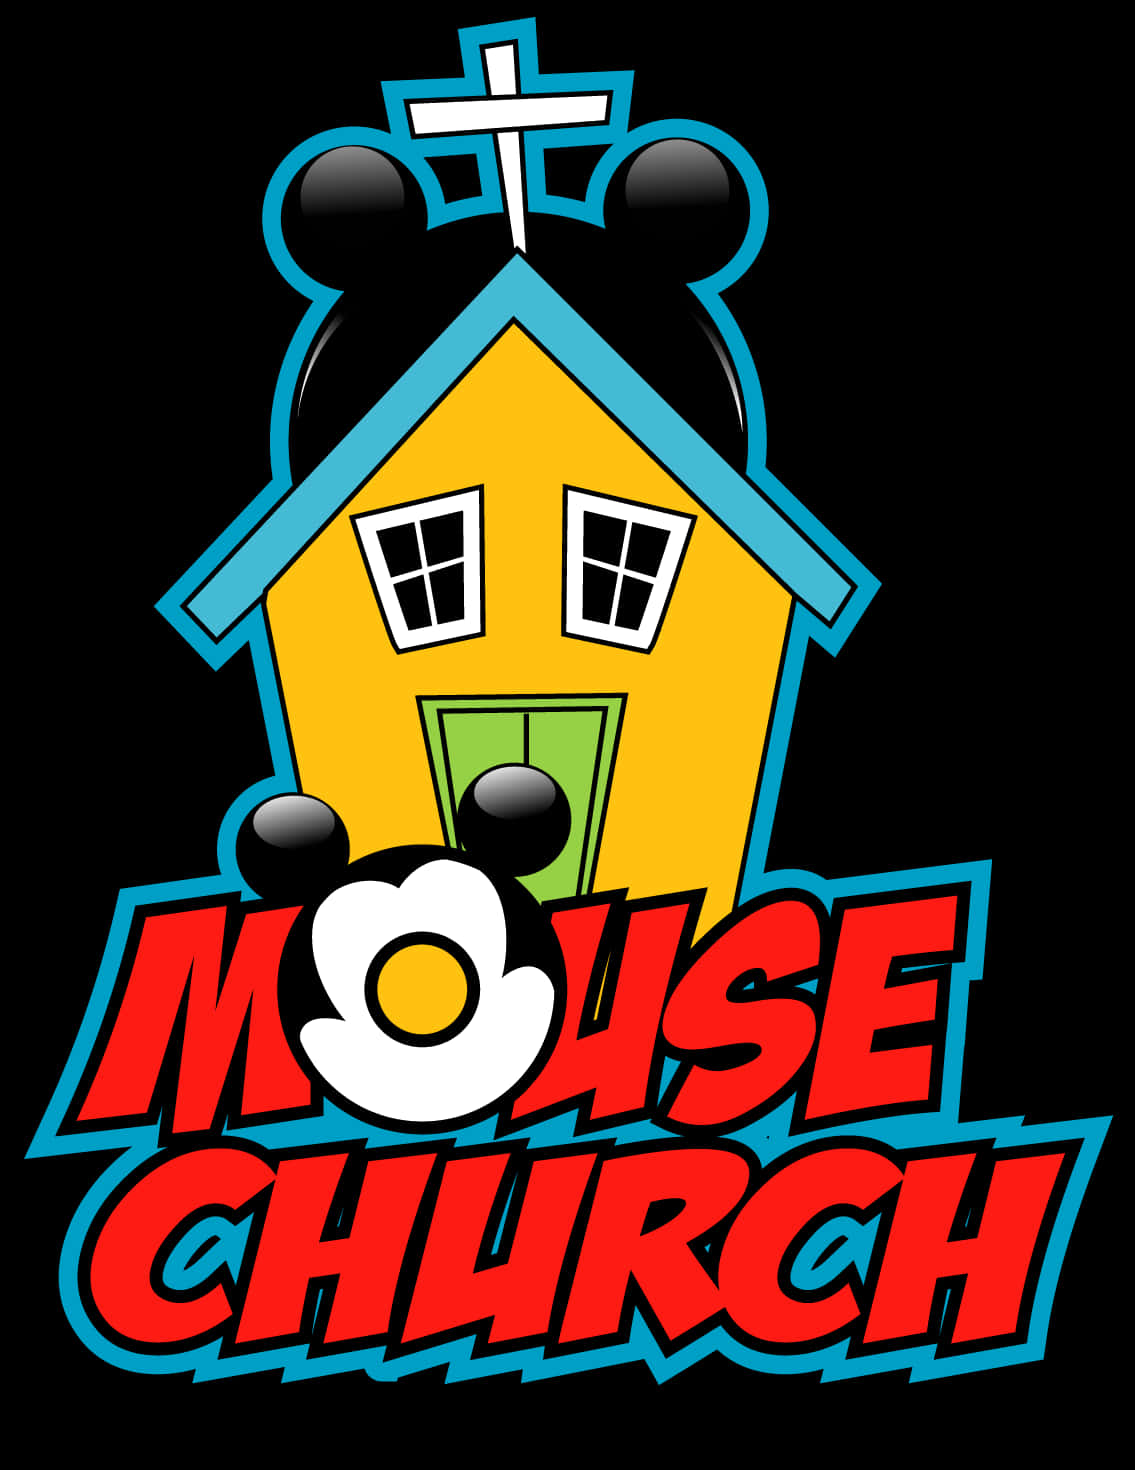 Mouse Church Graphic Illustration